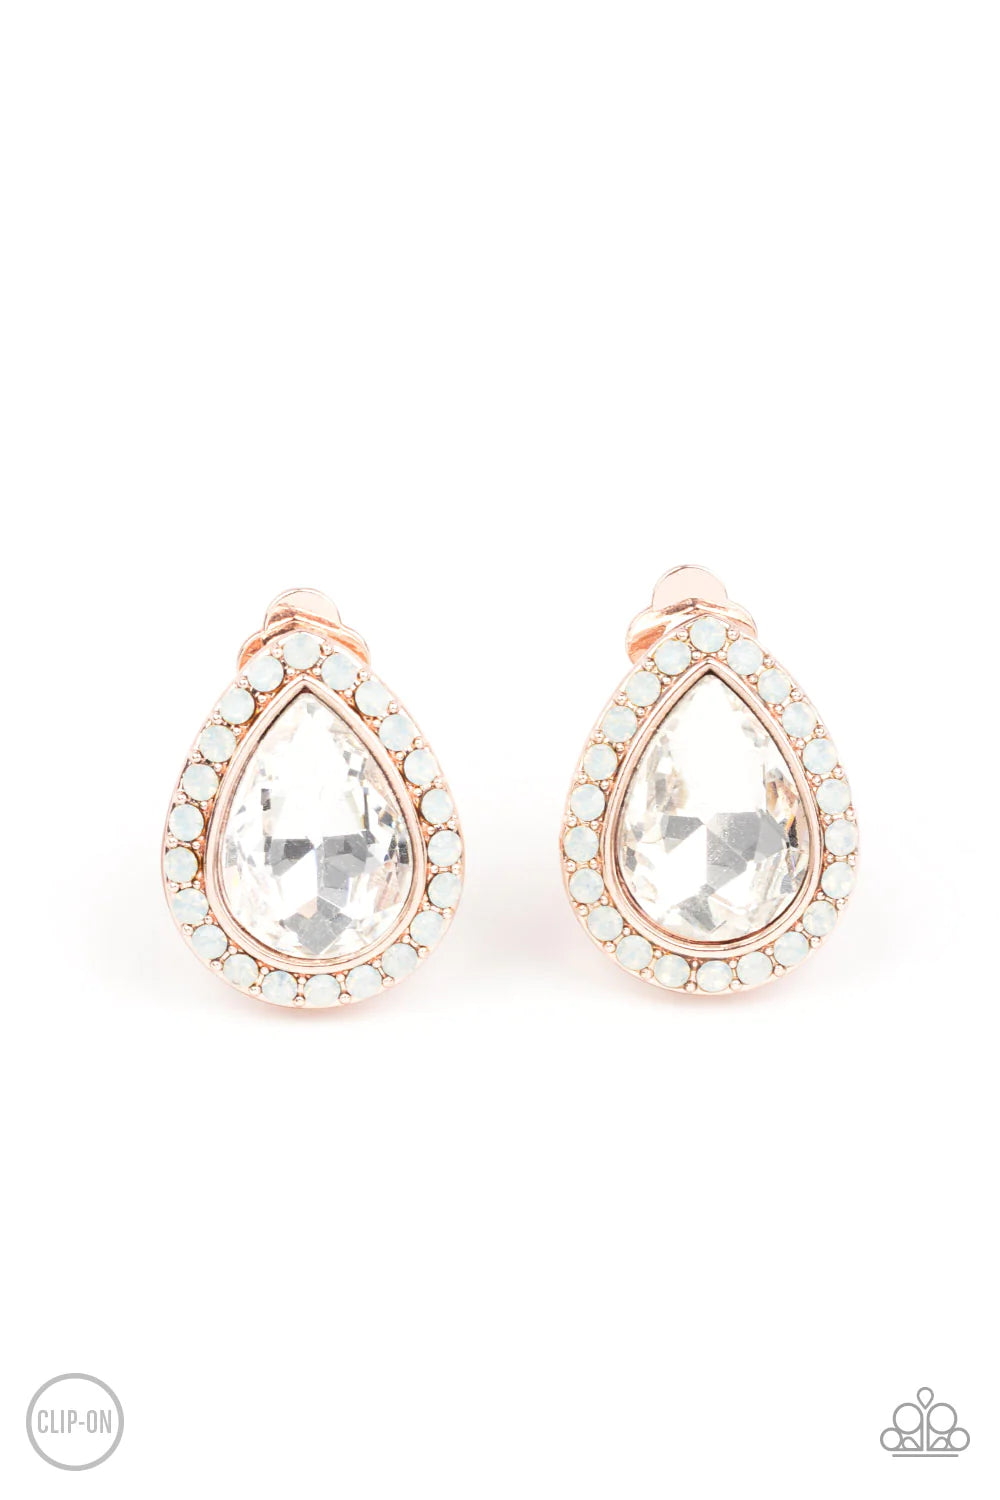 Paparazzi Accessories Cosmic Castles - Rose Gold *Clip-On A faceted white teardrop gem is pressed into a rose gold frame bordered with opalescent white rhinestones for a glamorous finish. Earring attaches to a standard clip-on fitting. Sold as one pair of